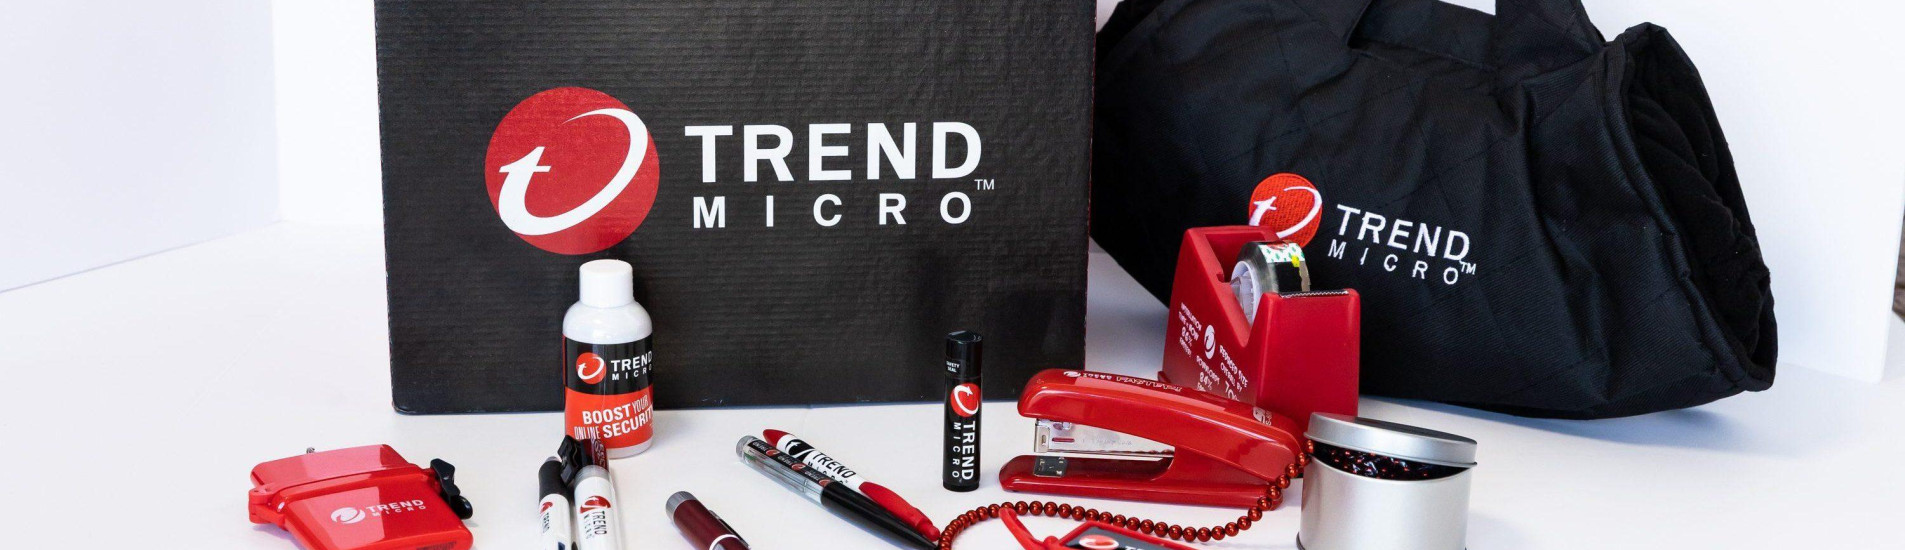 Trend Micro Promotional Items by MPX Group